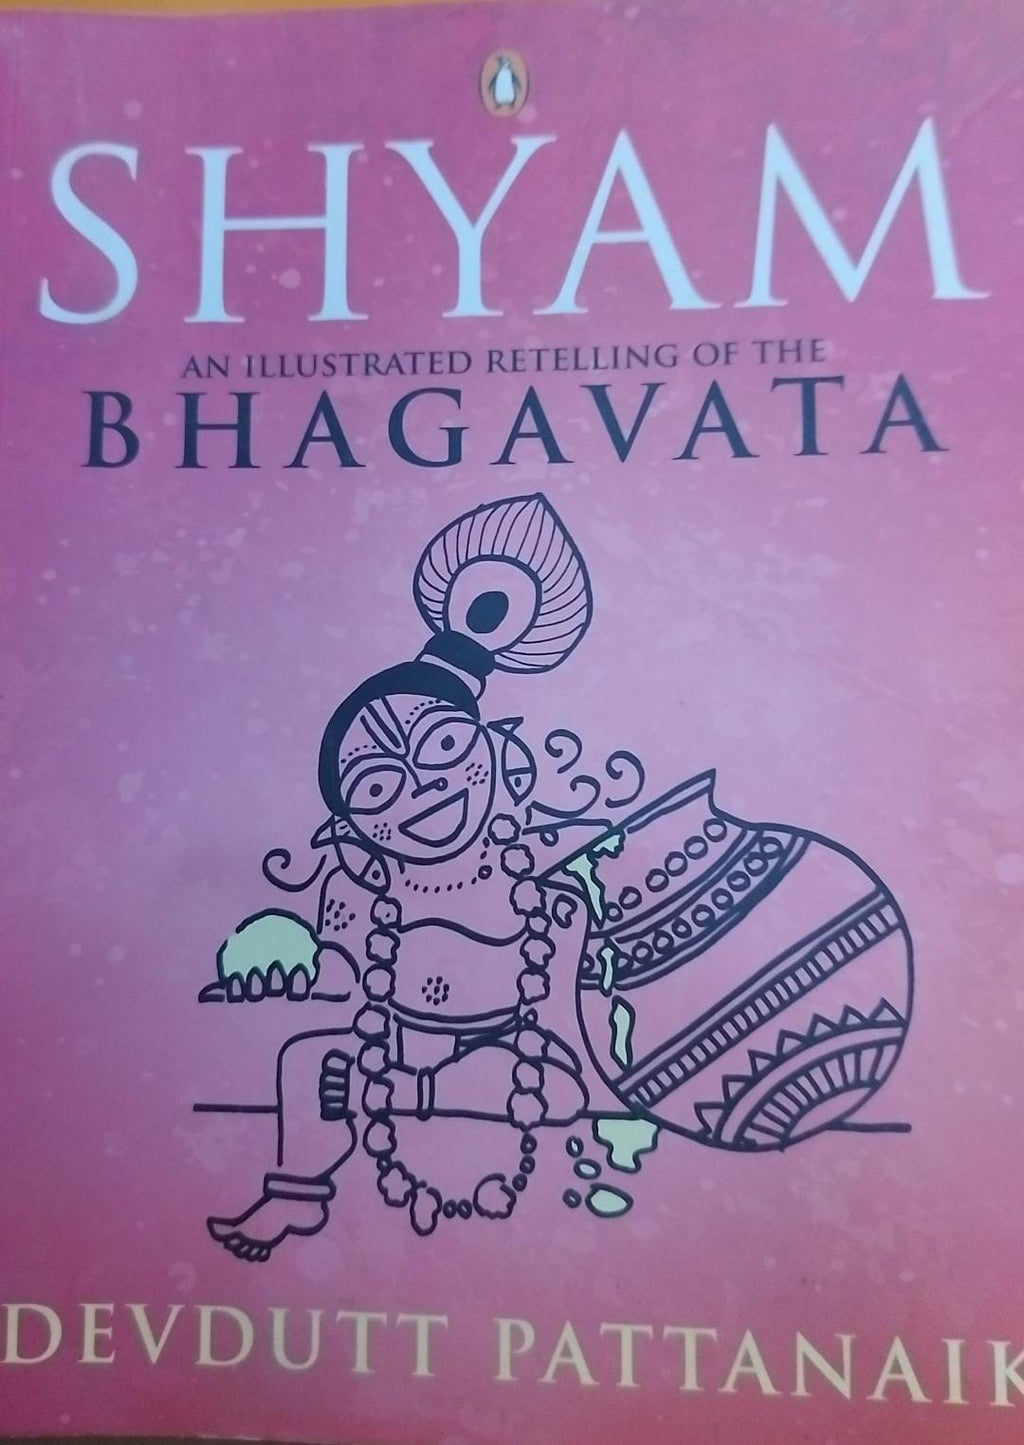 (Used) Shyam: An Illustrated Retelling of the Bhagavata (Papercover)